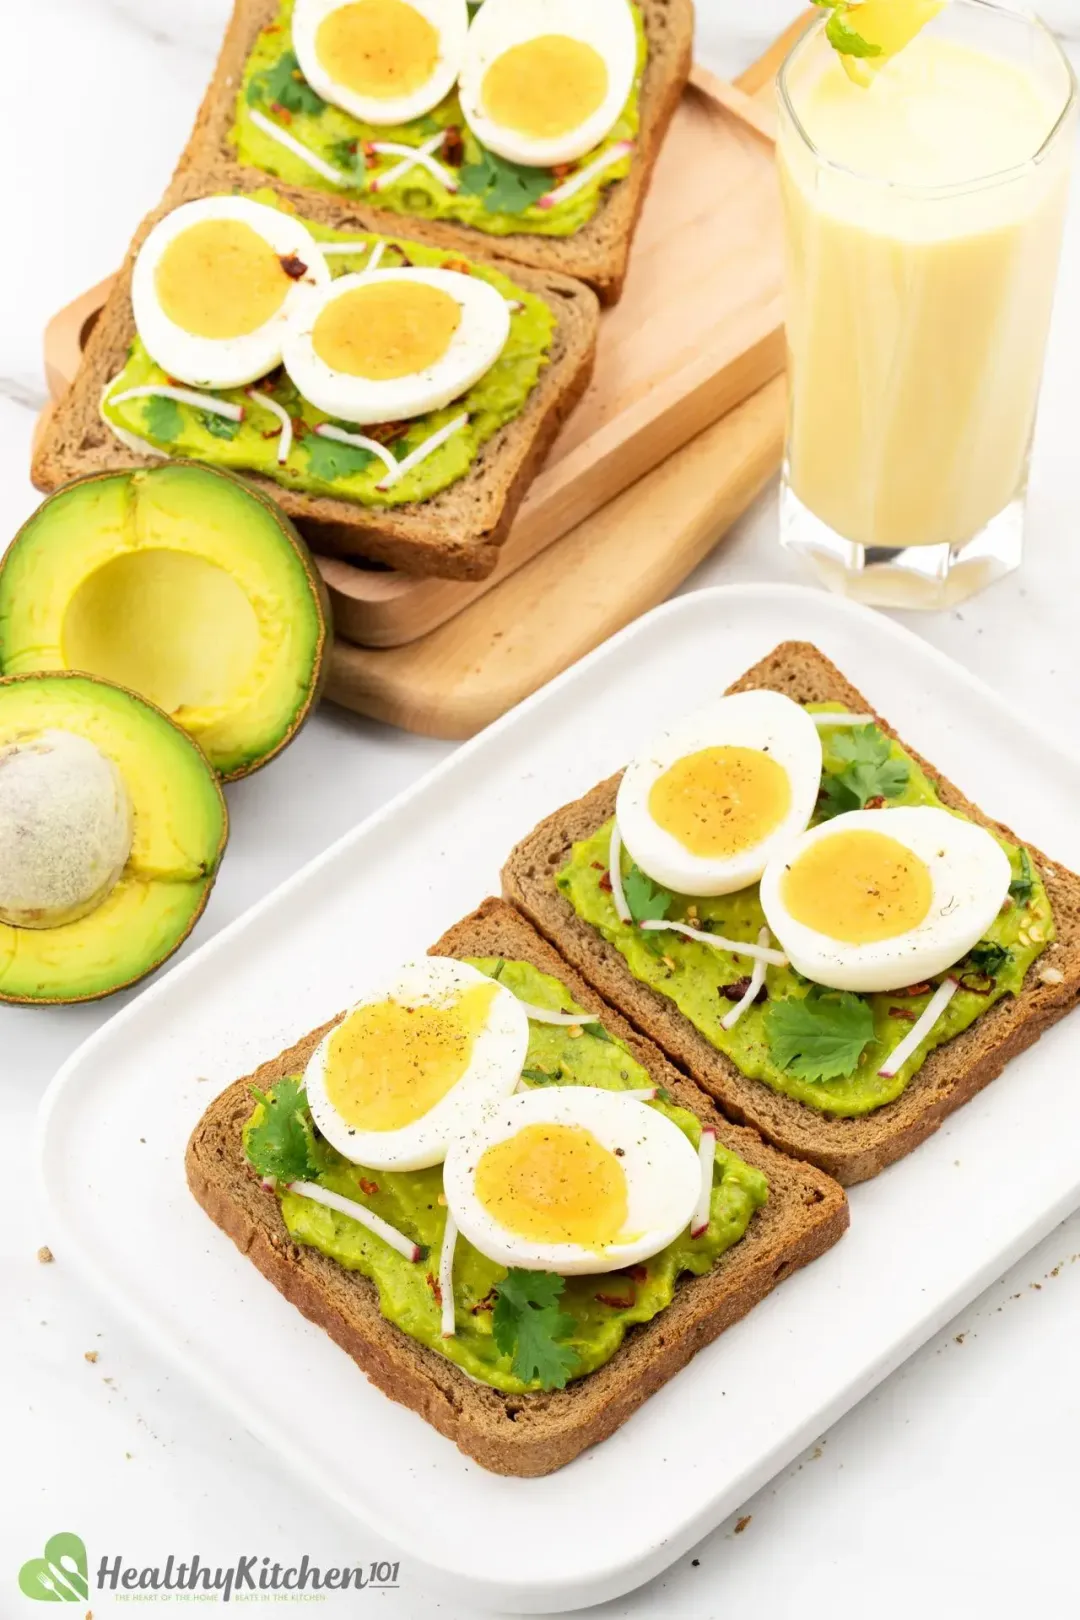 Four slices of avocado toast and boiled eggs plated together with halved avocado and a glass of mango smoothie